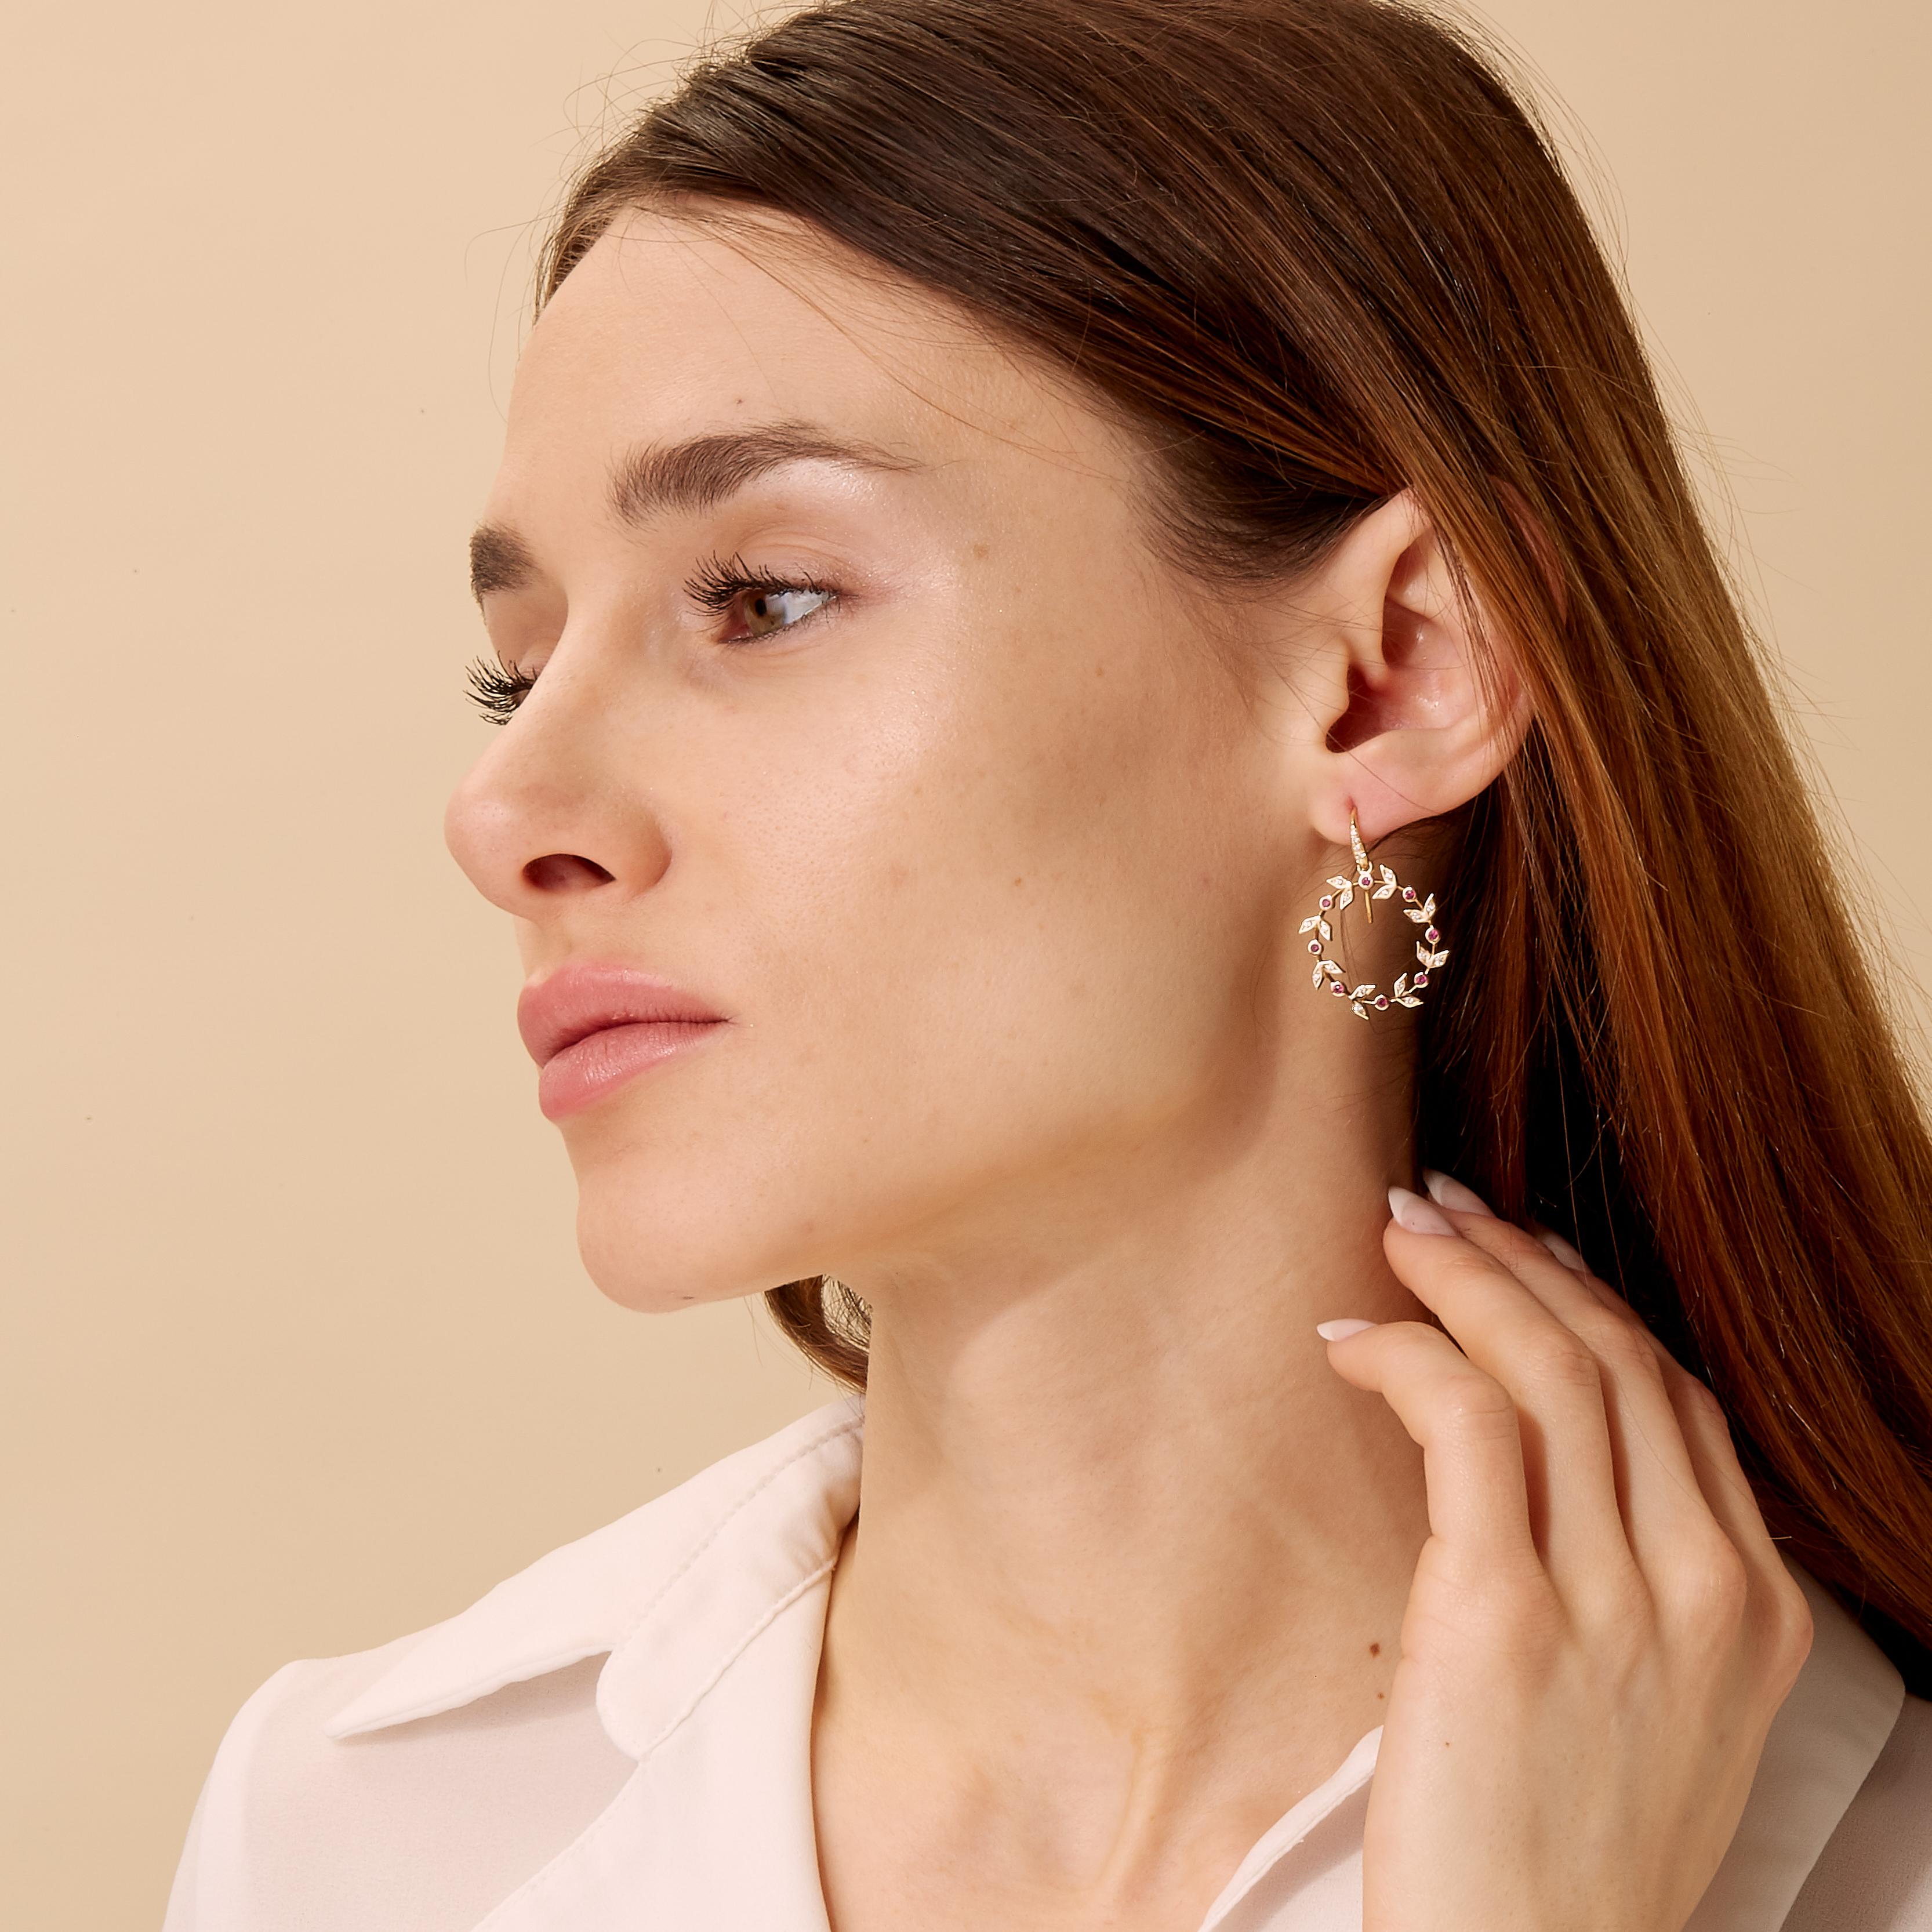 Created in 18kyg
Rubies 0.35 carat approx.
Diamonds 0.30 carat approx.
Limited edition

Adorn yourself with exquisite elegance with these exquisite Candy Blue Topaz and Moon Quartz Earrings, created in 18kyg. Embellished with rubies and diamonds